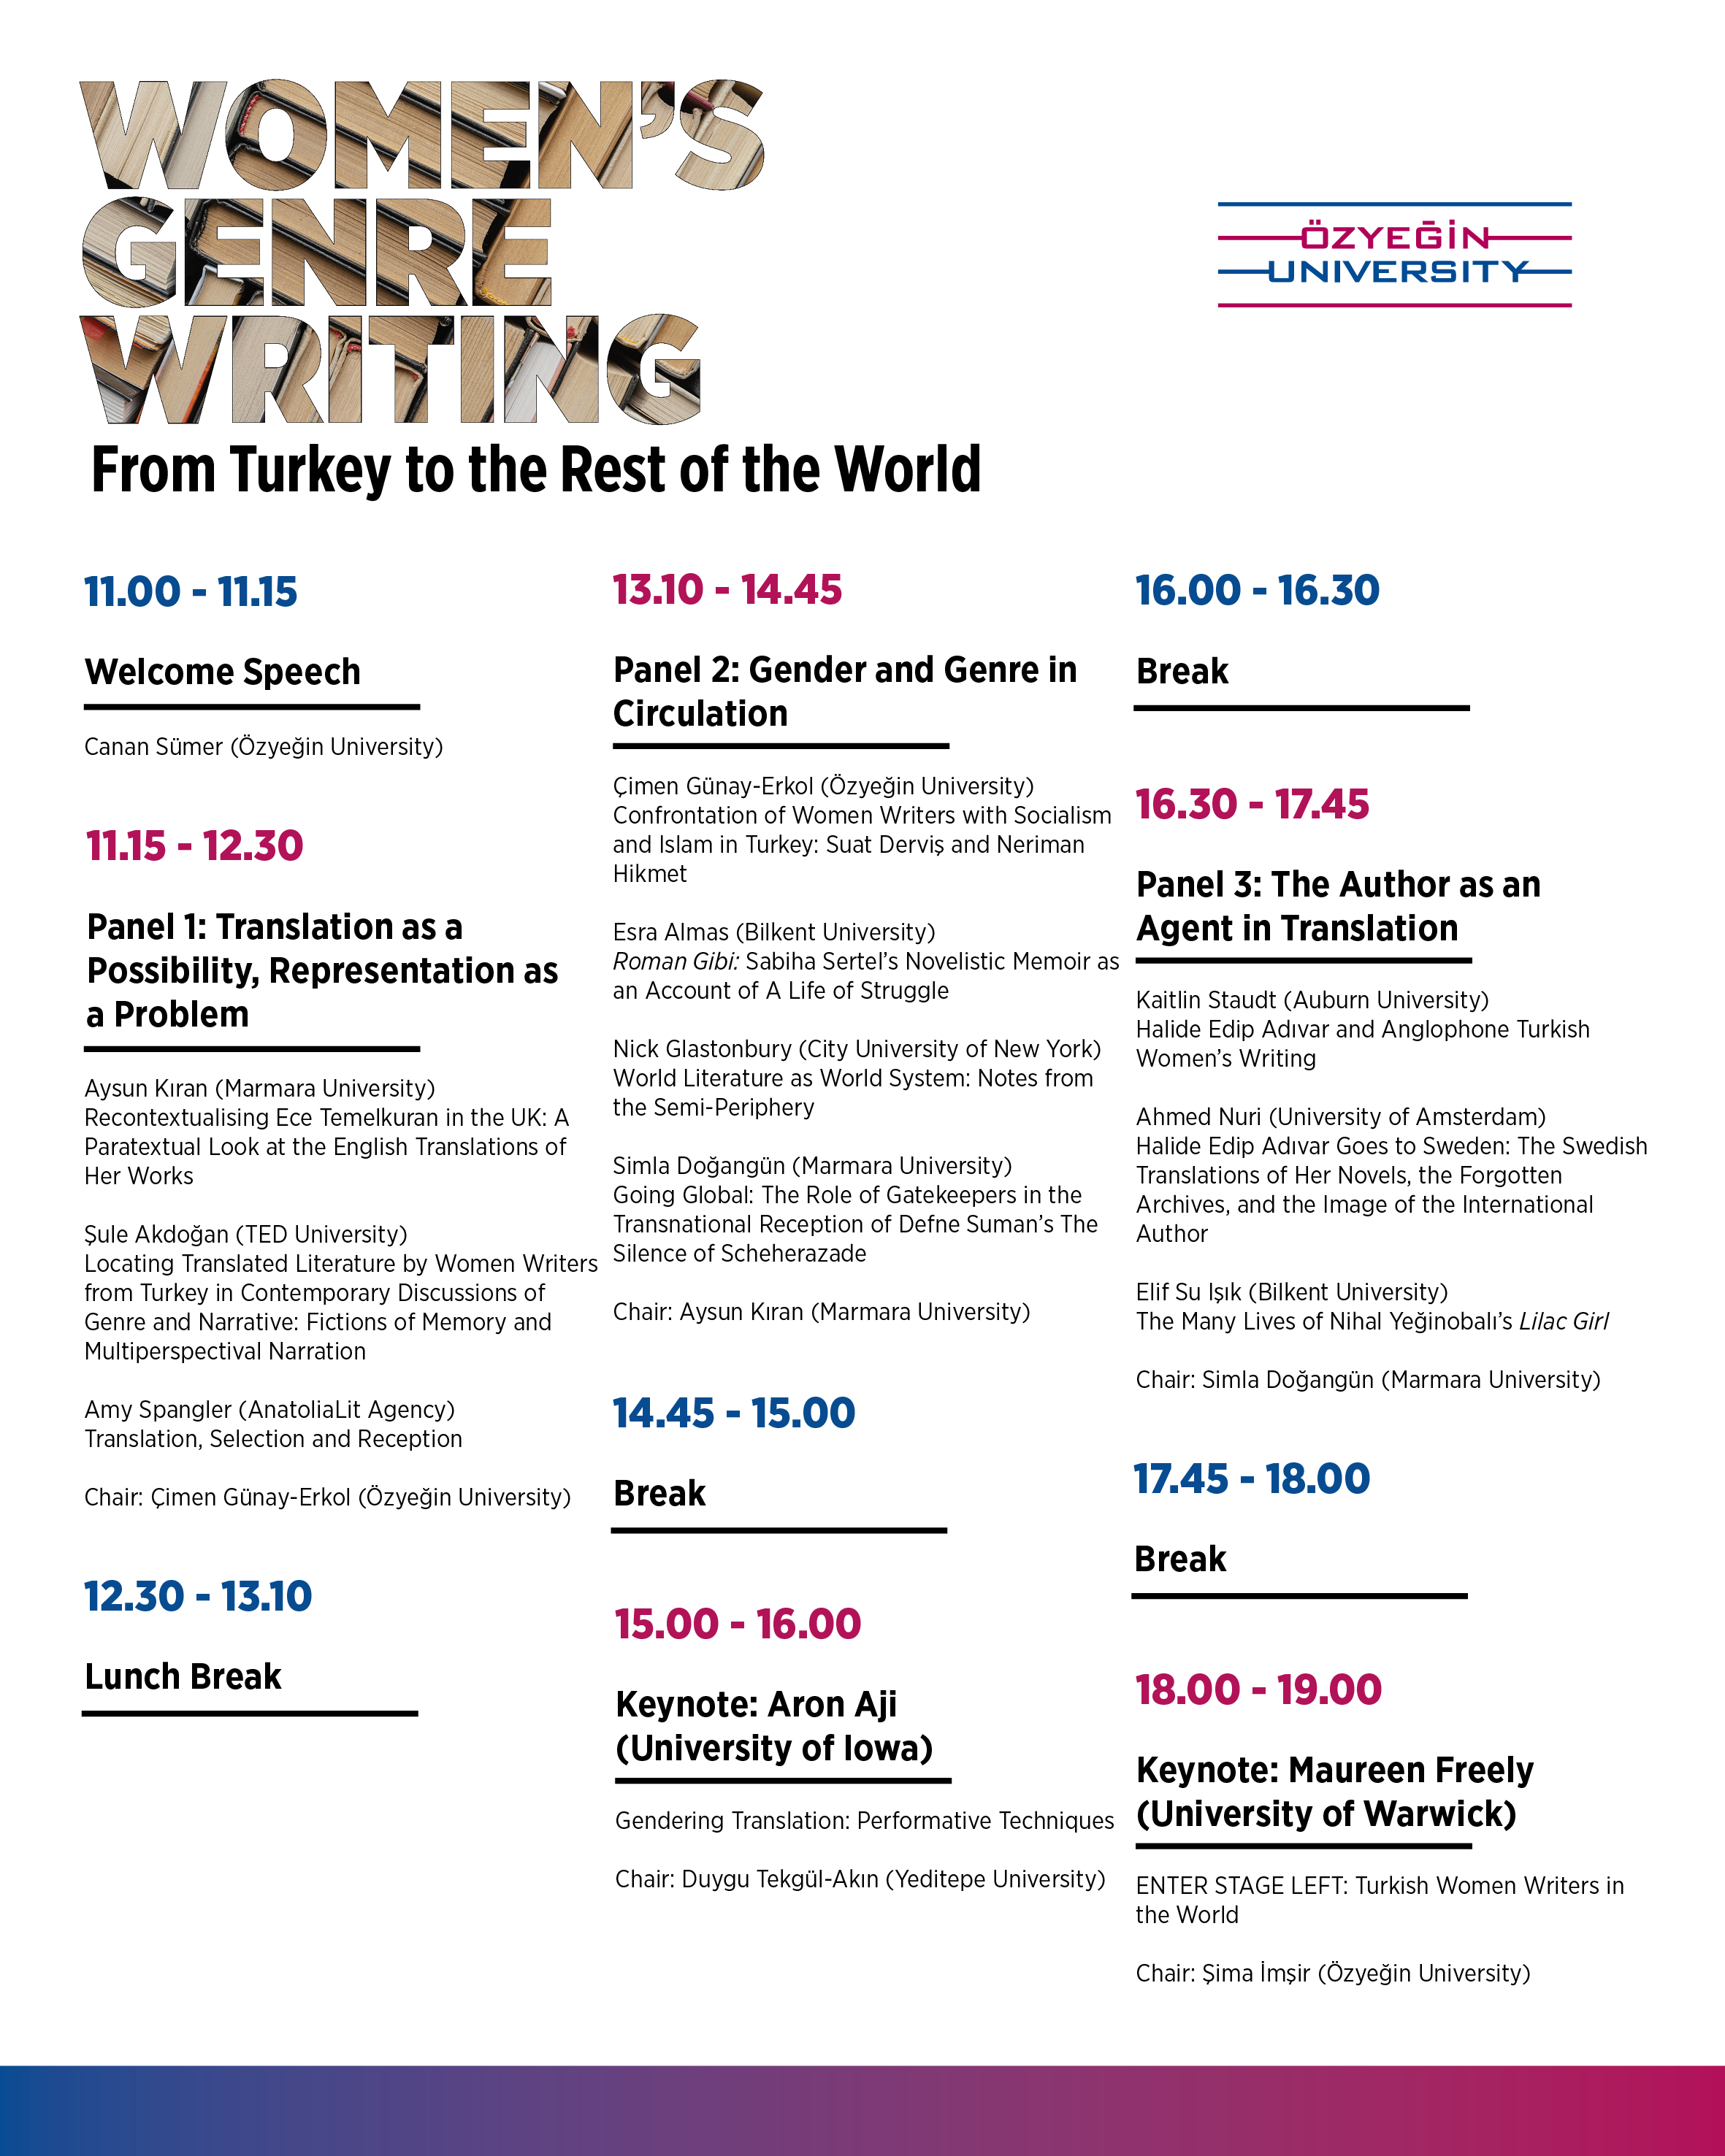 programme for conference. For text version see https://www.ozyegin.edu.tr/en/events/18974/%22women 